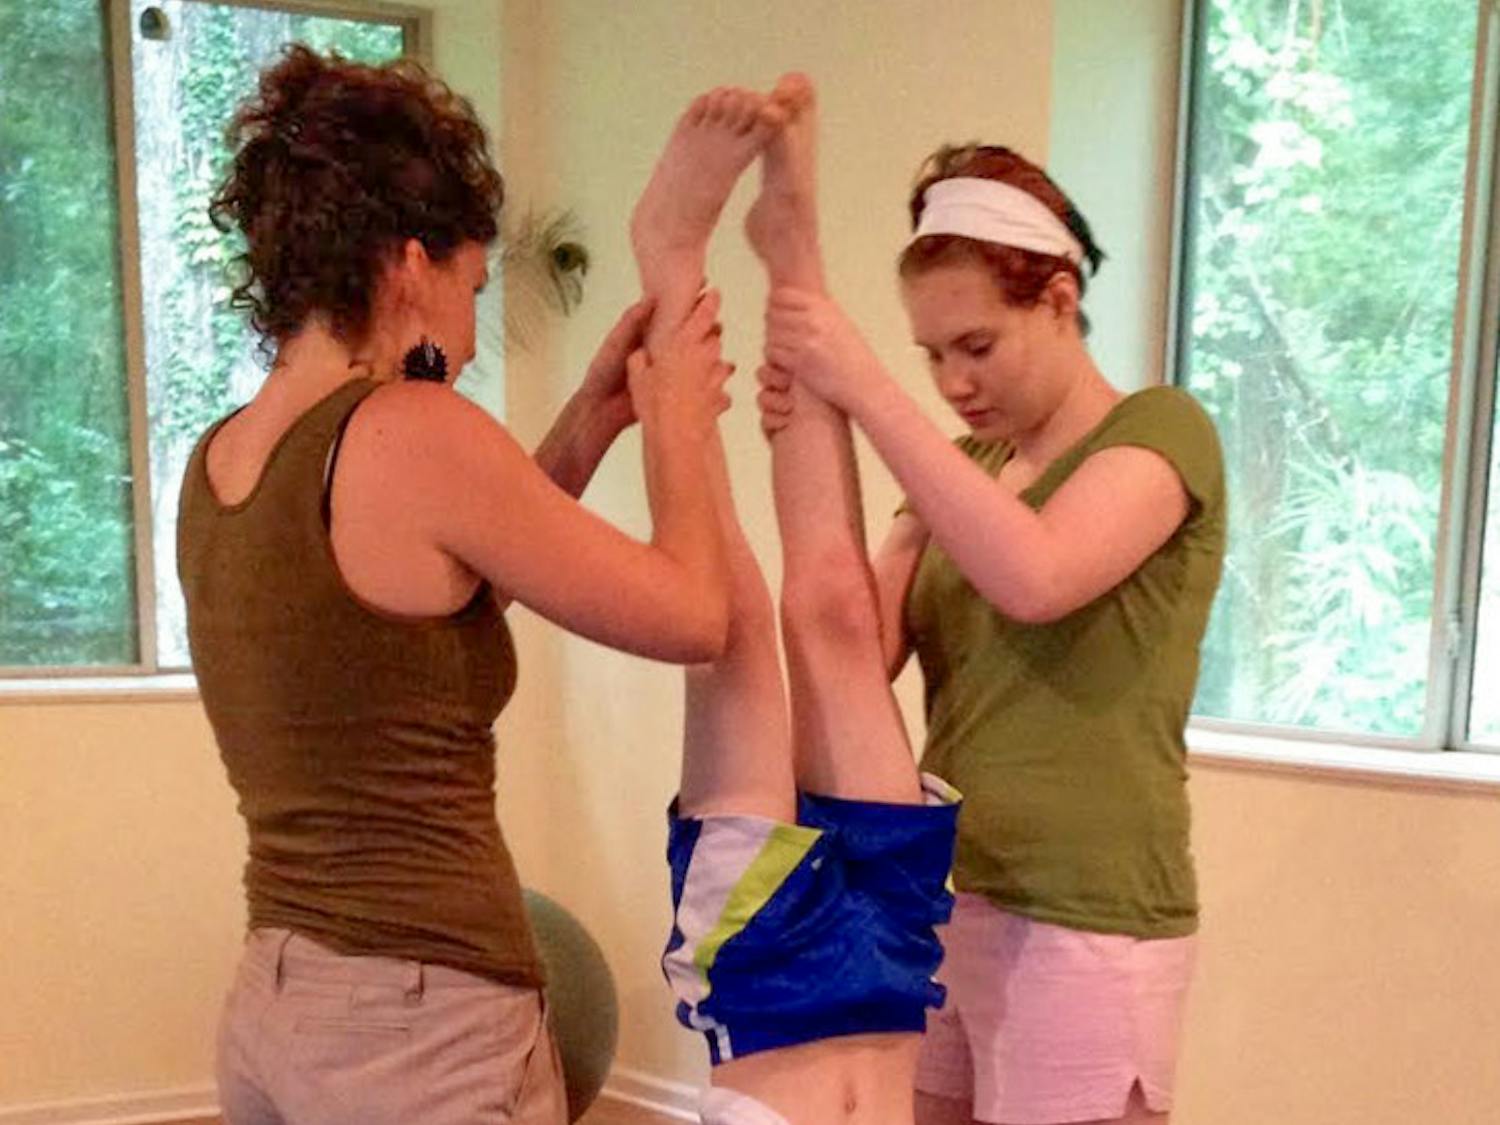 Through her program, Yoga 4 Youth, 34-year-old Brianna Schiavoni has channelled her passions for mental-health counseling and yoga to help children in the community achieve mental-health equilibrium. 